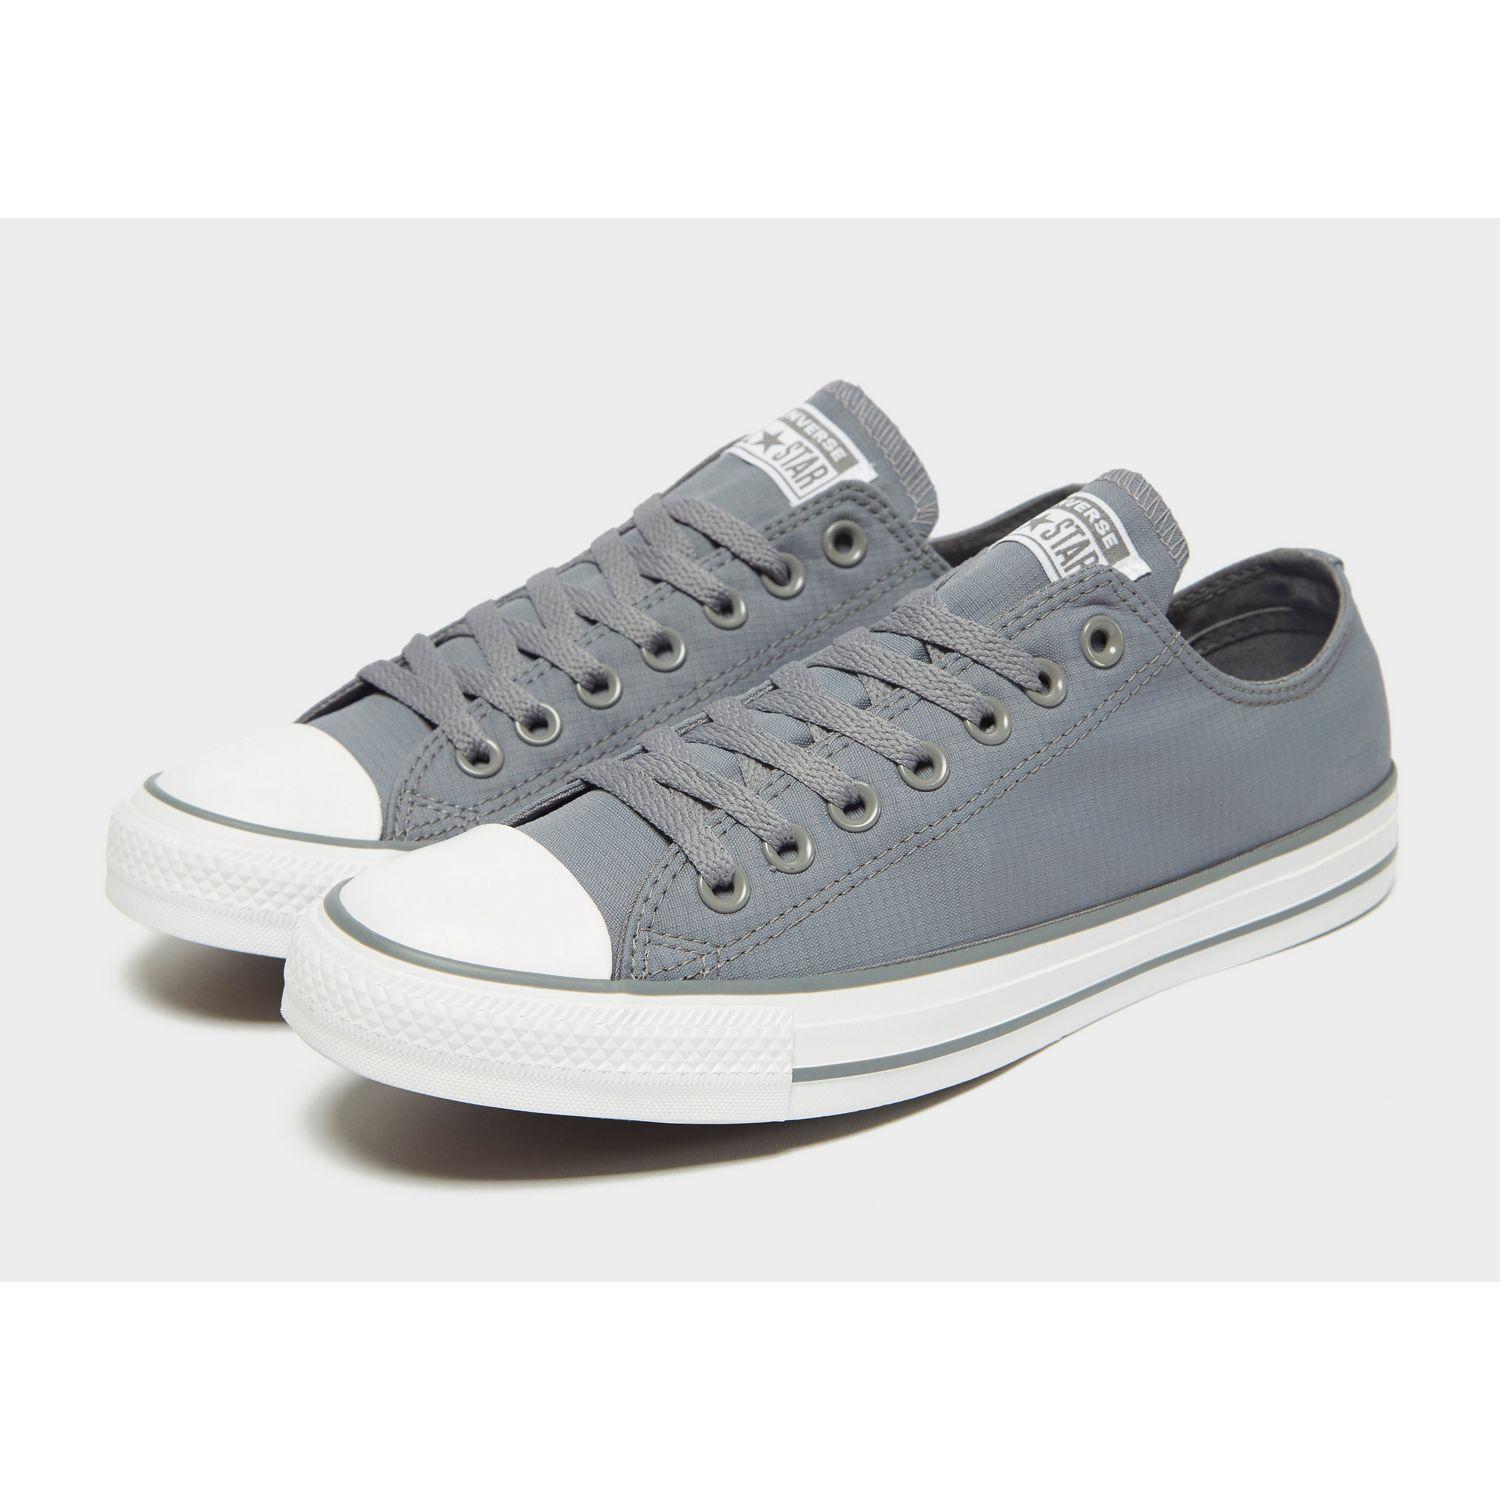 converse all star ox ripstop off 78 